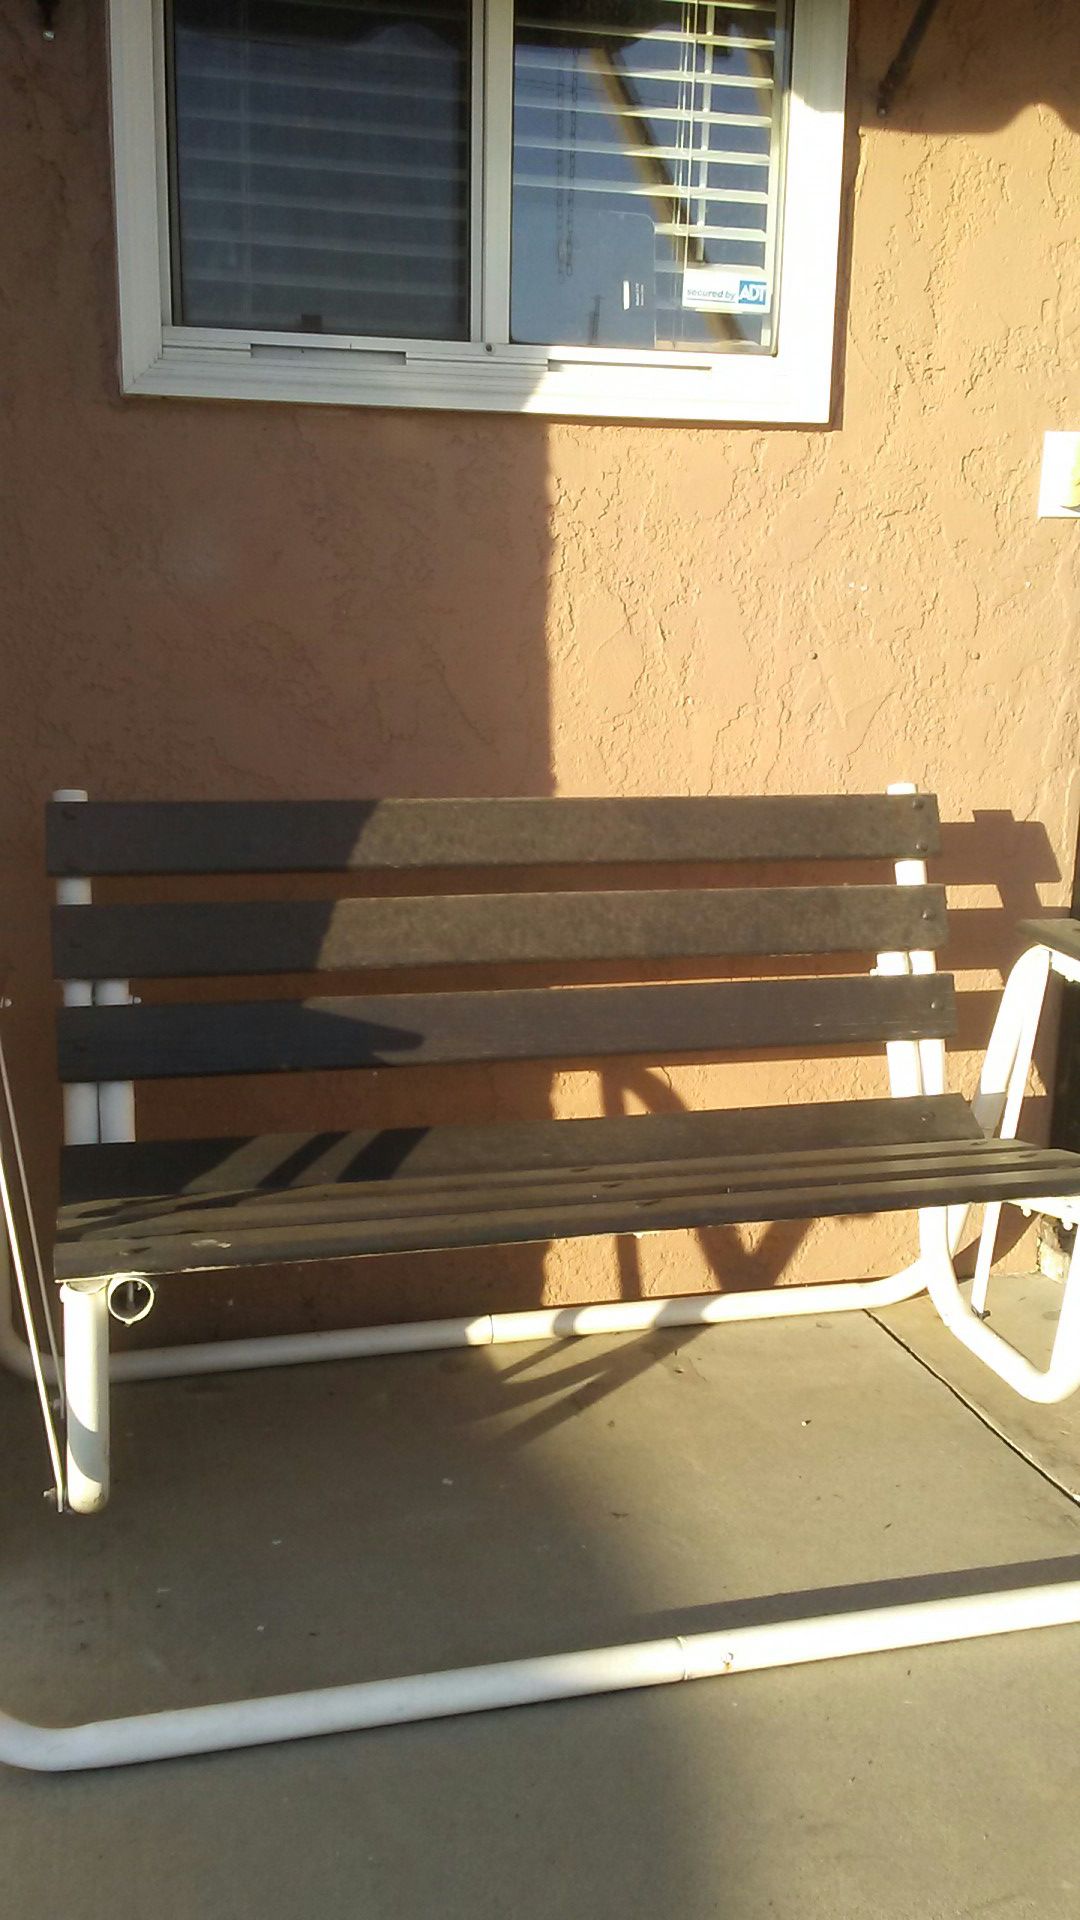 🏡Porch or Patio Glider Swing 🏡 Recently painted Asking $30 ✈Pickup in Anaheim 92804